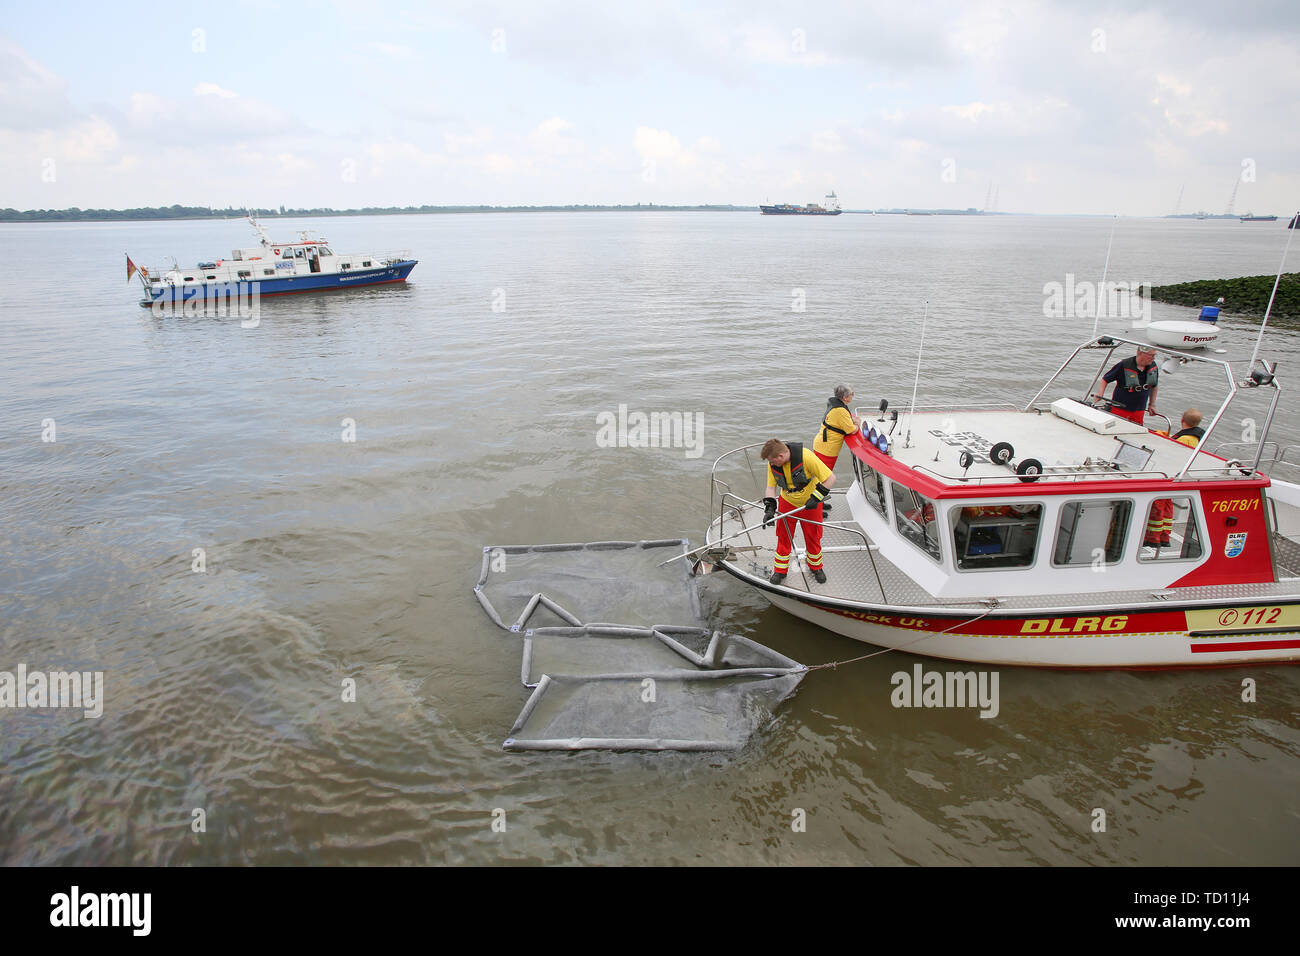 Stadersand, Germany. 11th June, 2019. DLRG emergency forces pick up oil from the surface of the Elbe. Operating materials had leaked from the hull of the sunken sailing ship 'No 5 Elbe' in the port of Stadersand, and the fire brigade was on site with the support of the German Federal Agency for Technical Relief and the German Aerospace Center (DLRG). The historic sailing ship, which has only recently been extensively renovated, collided with a container ship on the Elbe and sank. Credit: Bodo Marks/dpa/Alamy Live News Stock Photo